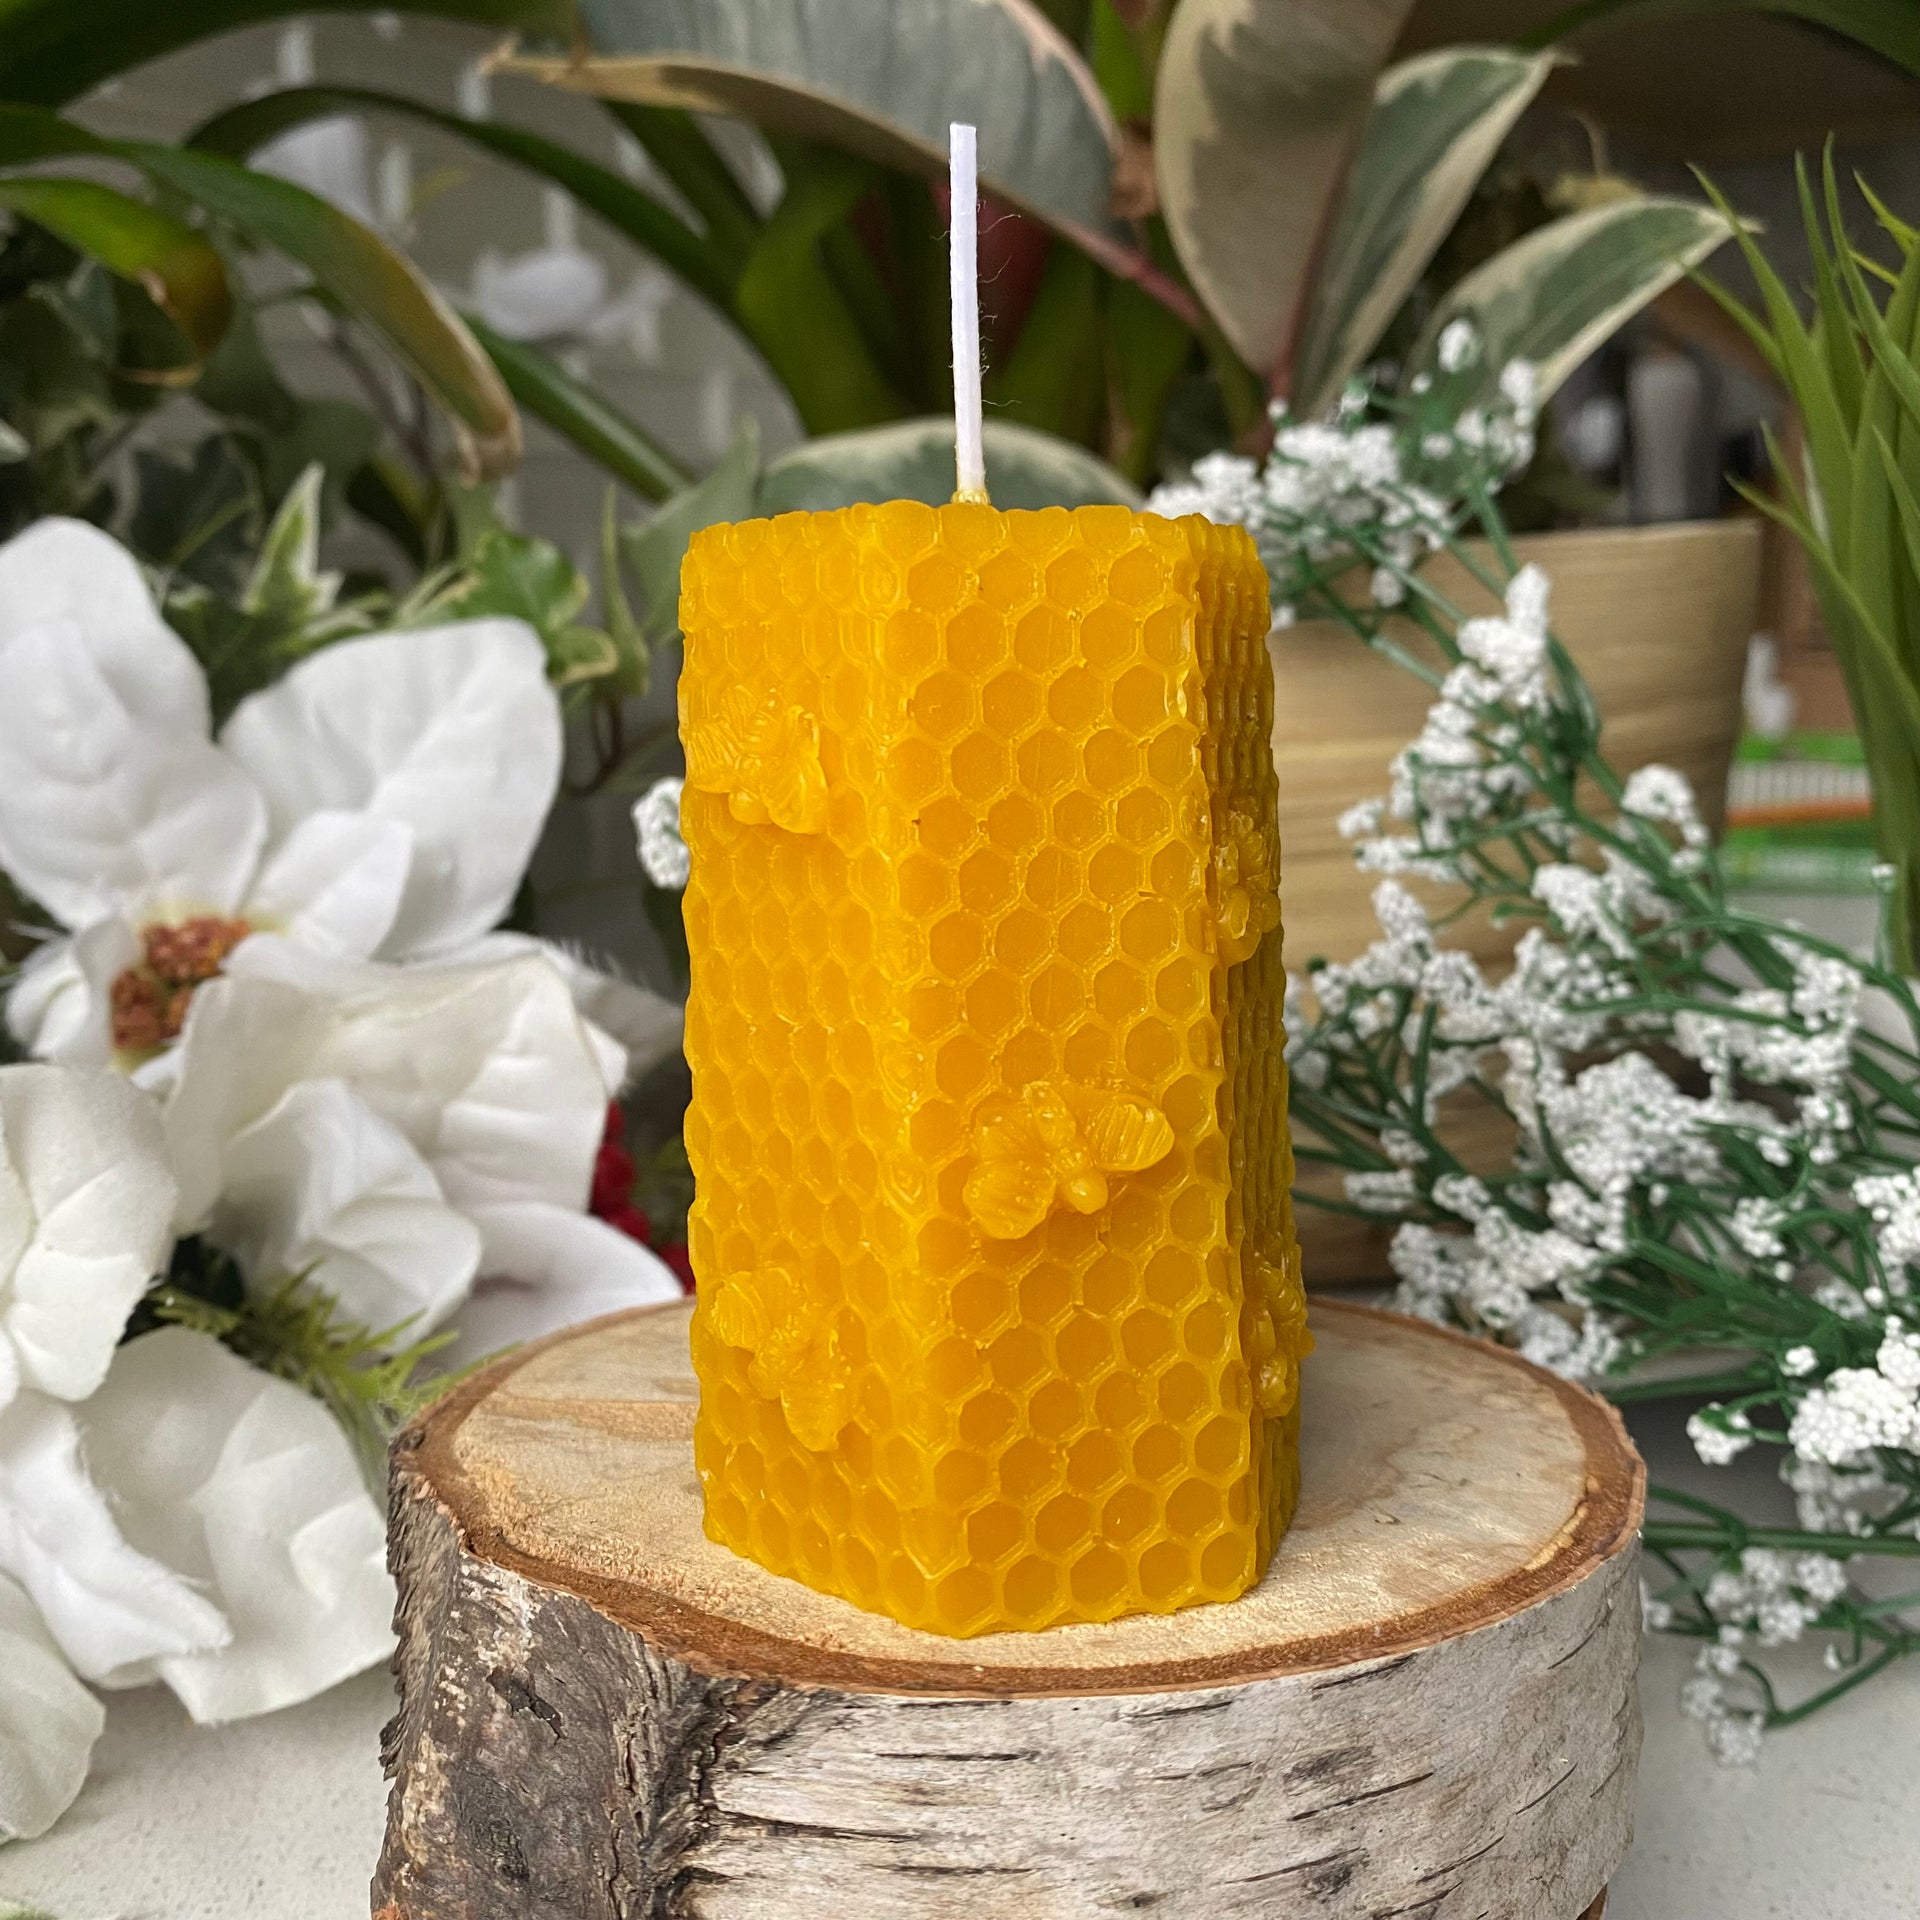 Miel D'or: Handmade Beeswax Candles and Raw Honey Products